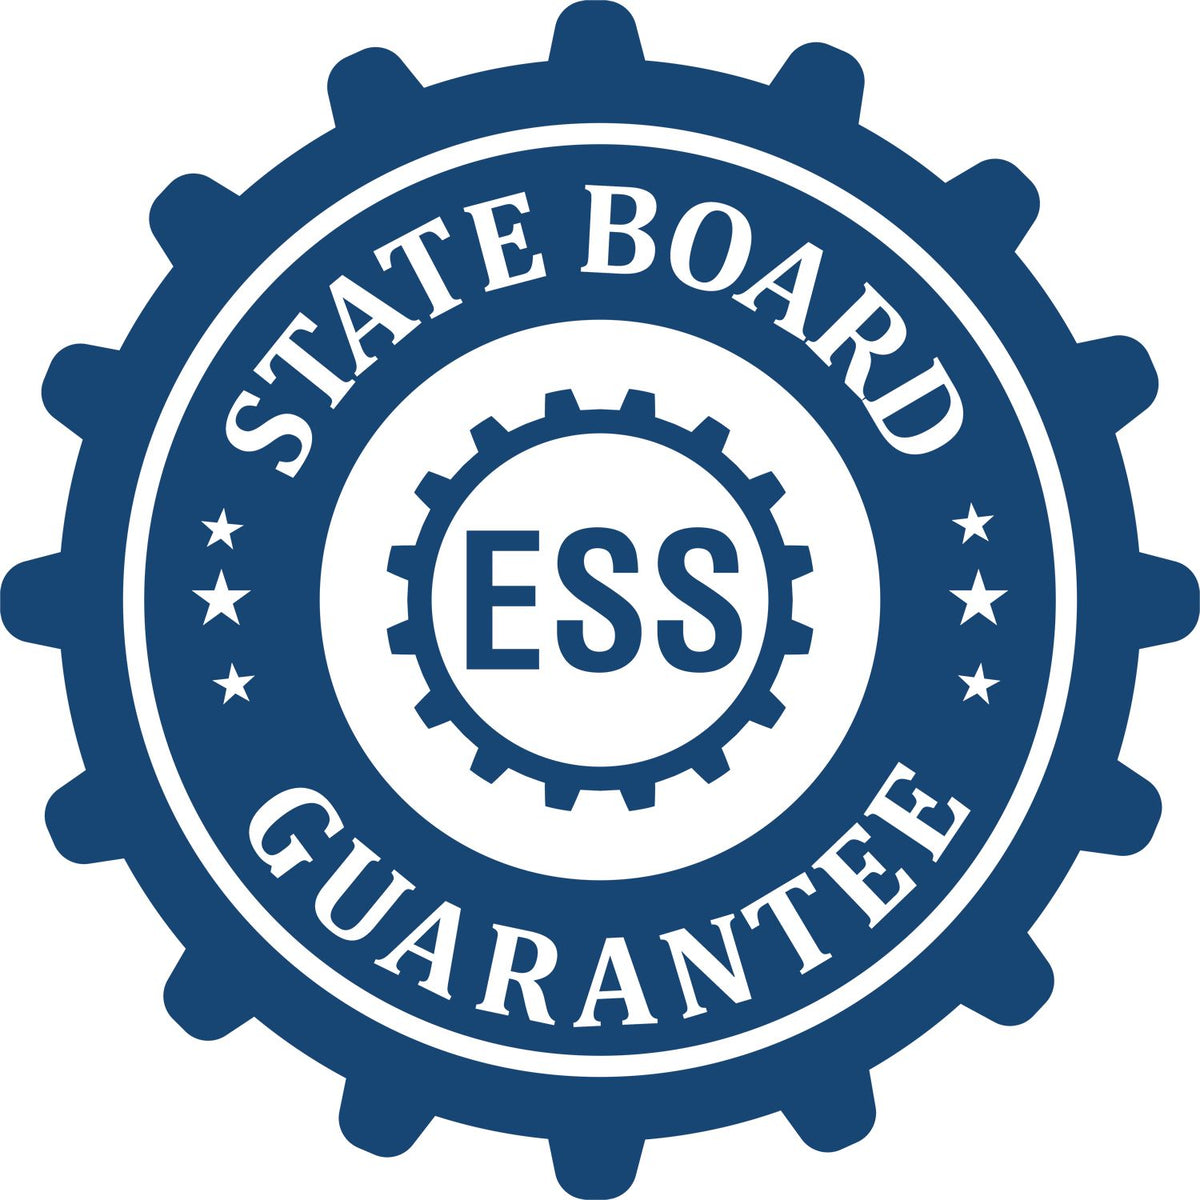 An emblem in a gear shape illustrating a state board guarantee for the Soft Maryland Professional Engineer Seal product.